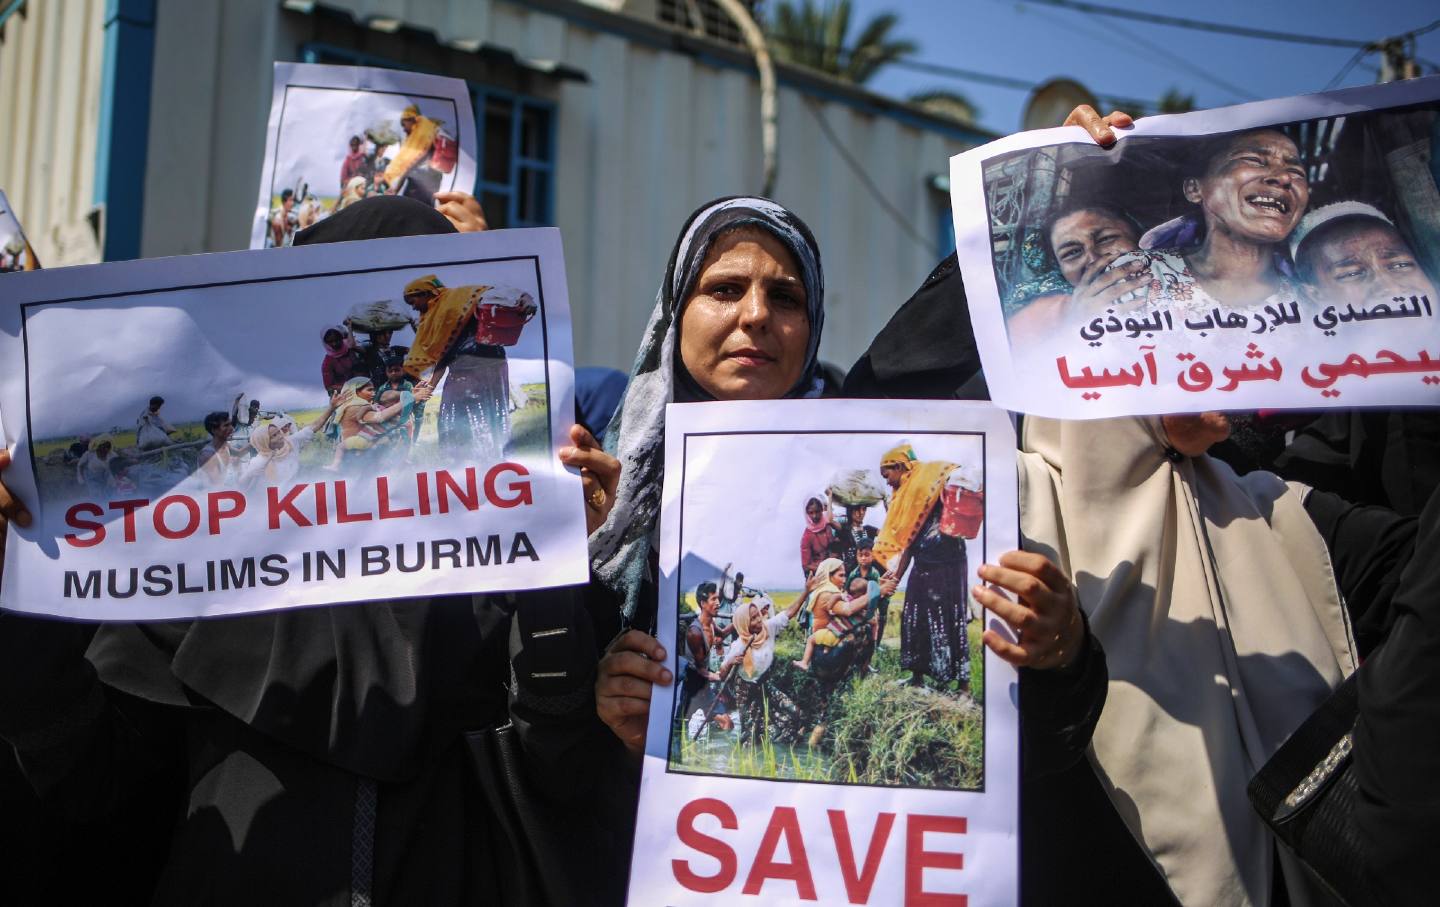 Demonstrators stage a rally to protest Myanmar's oppression of Rohingya Muslims in Myanmars Rakhine state, in Gaza City on September 10, 2017.